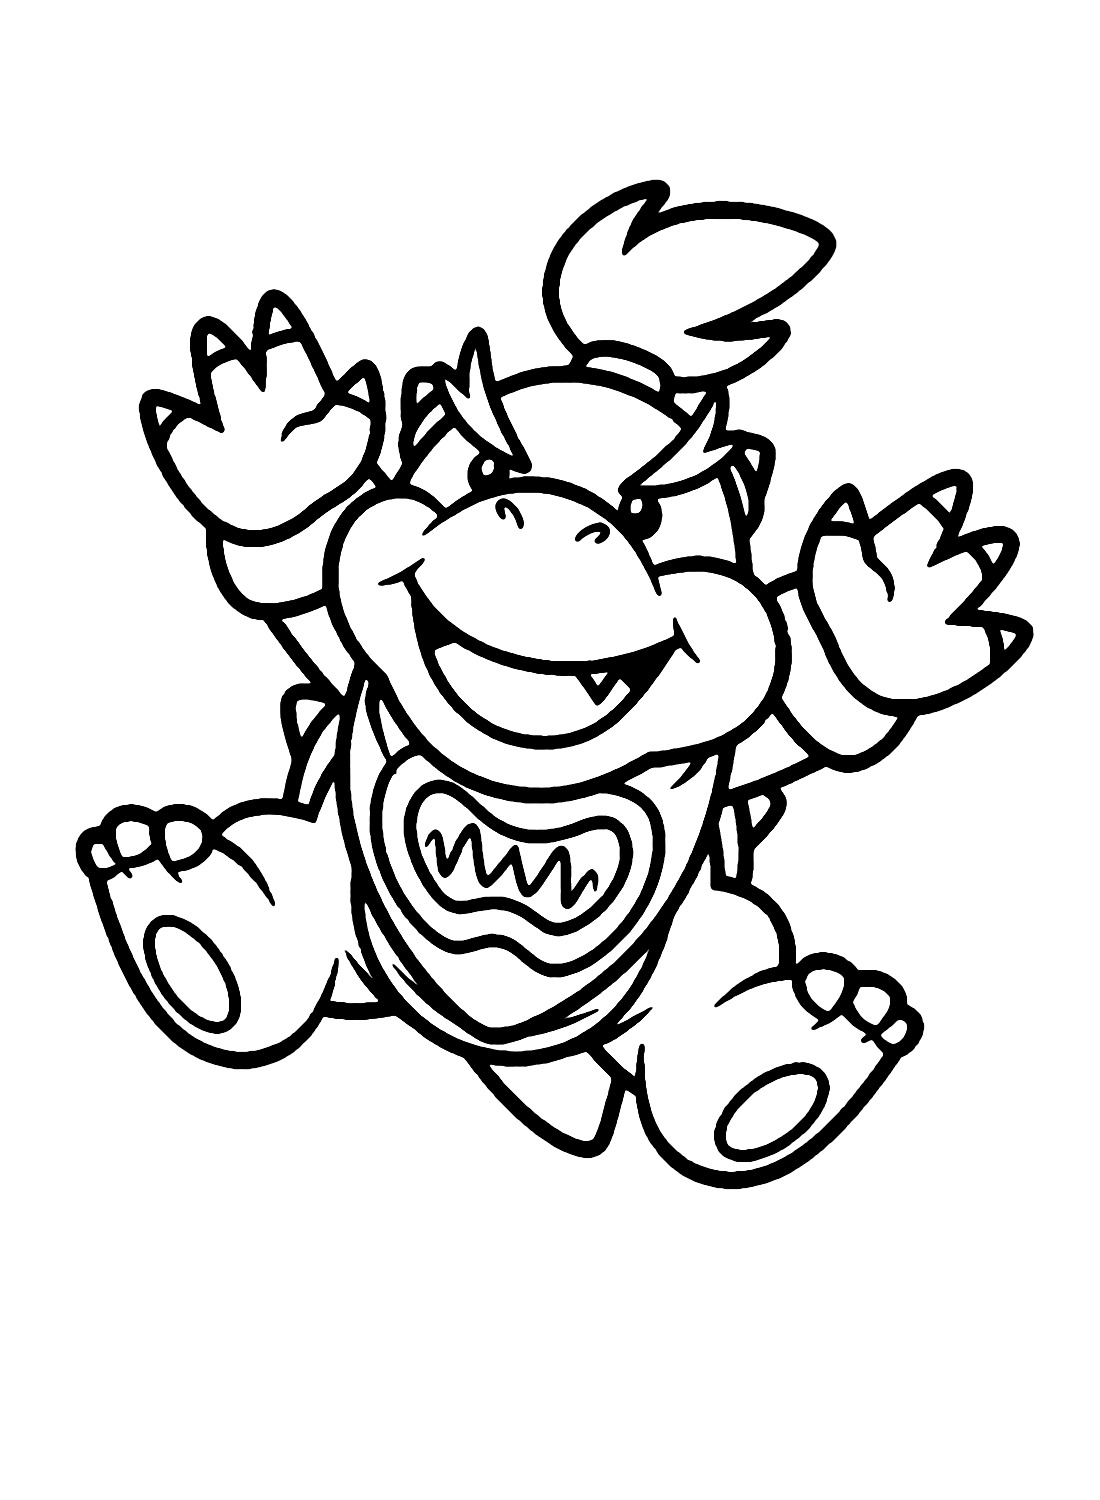 Funny Bowser Jr Coloring Page